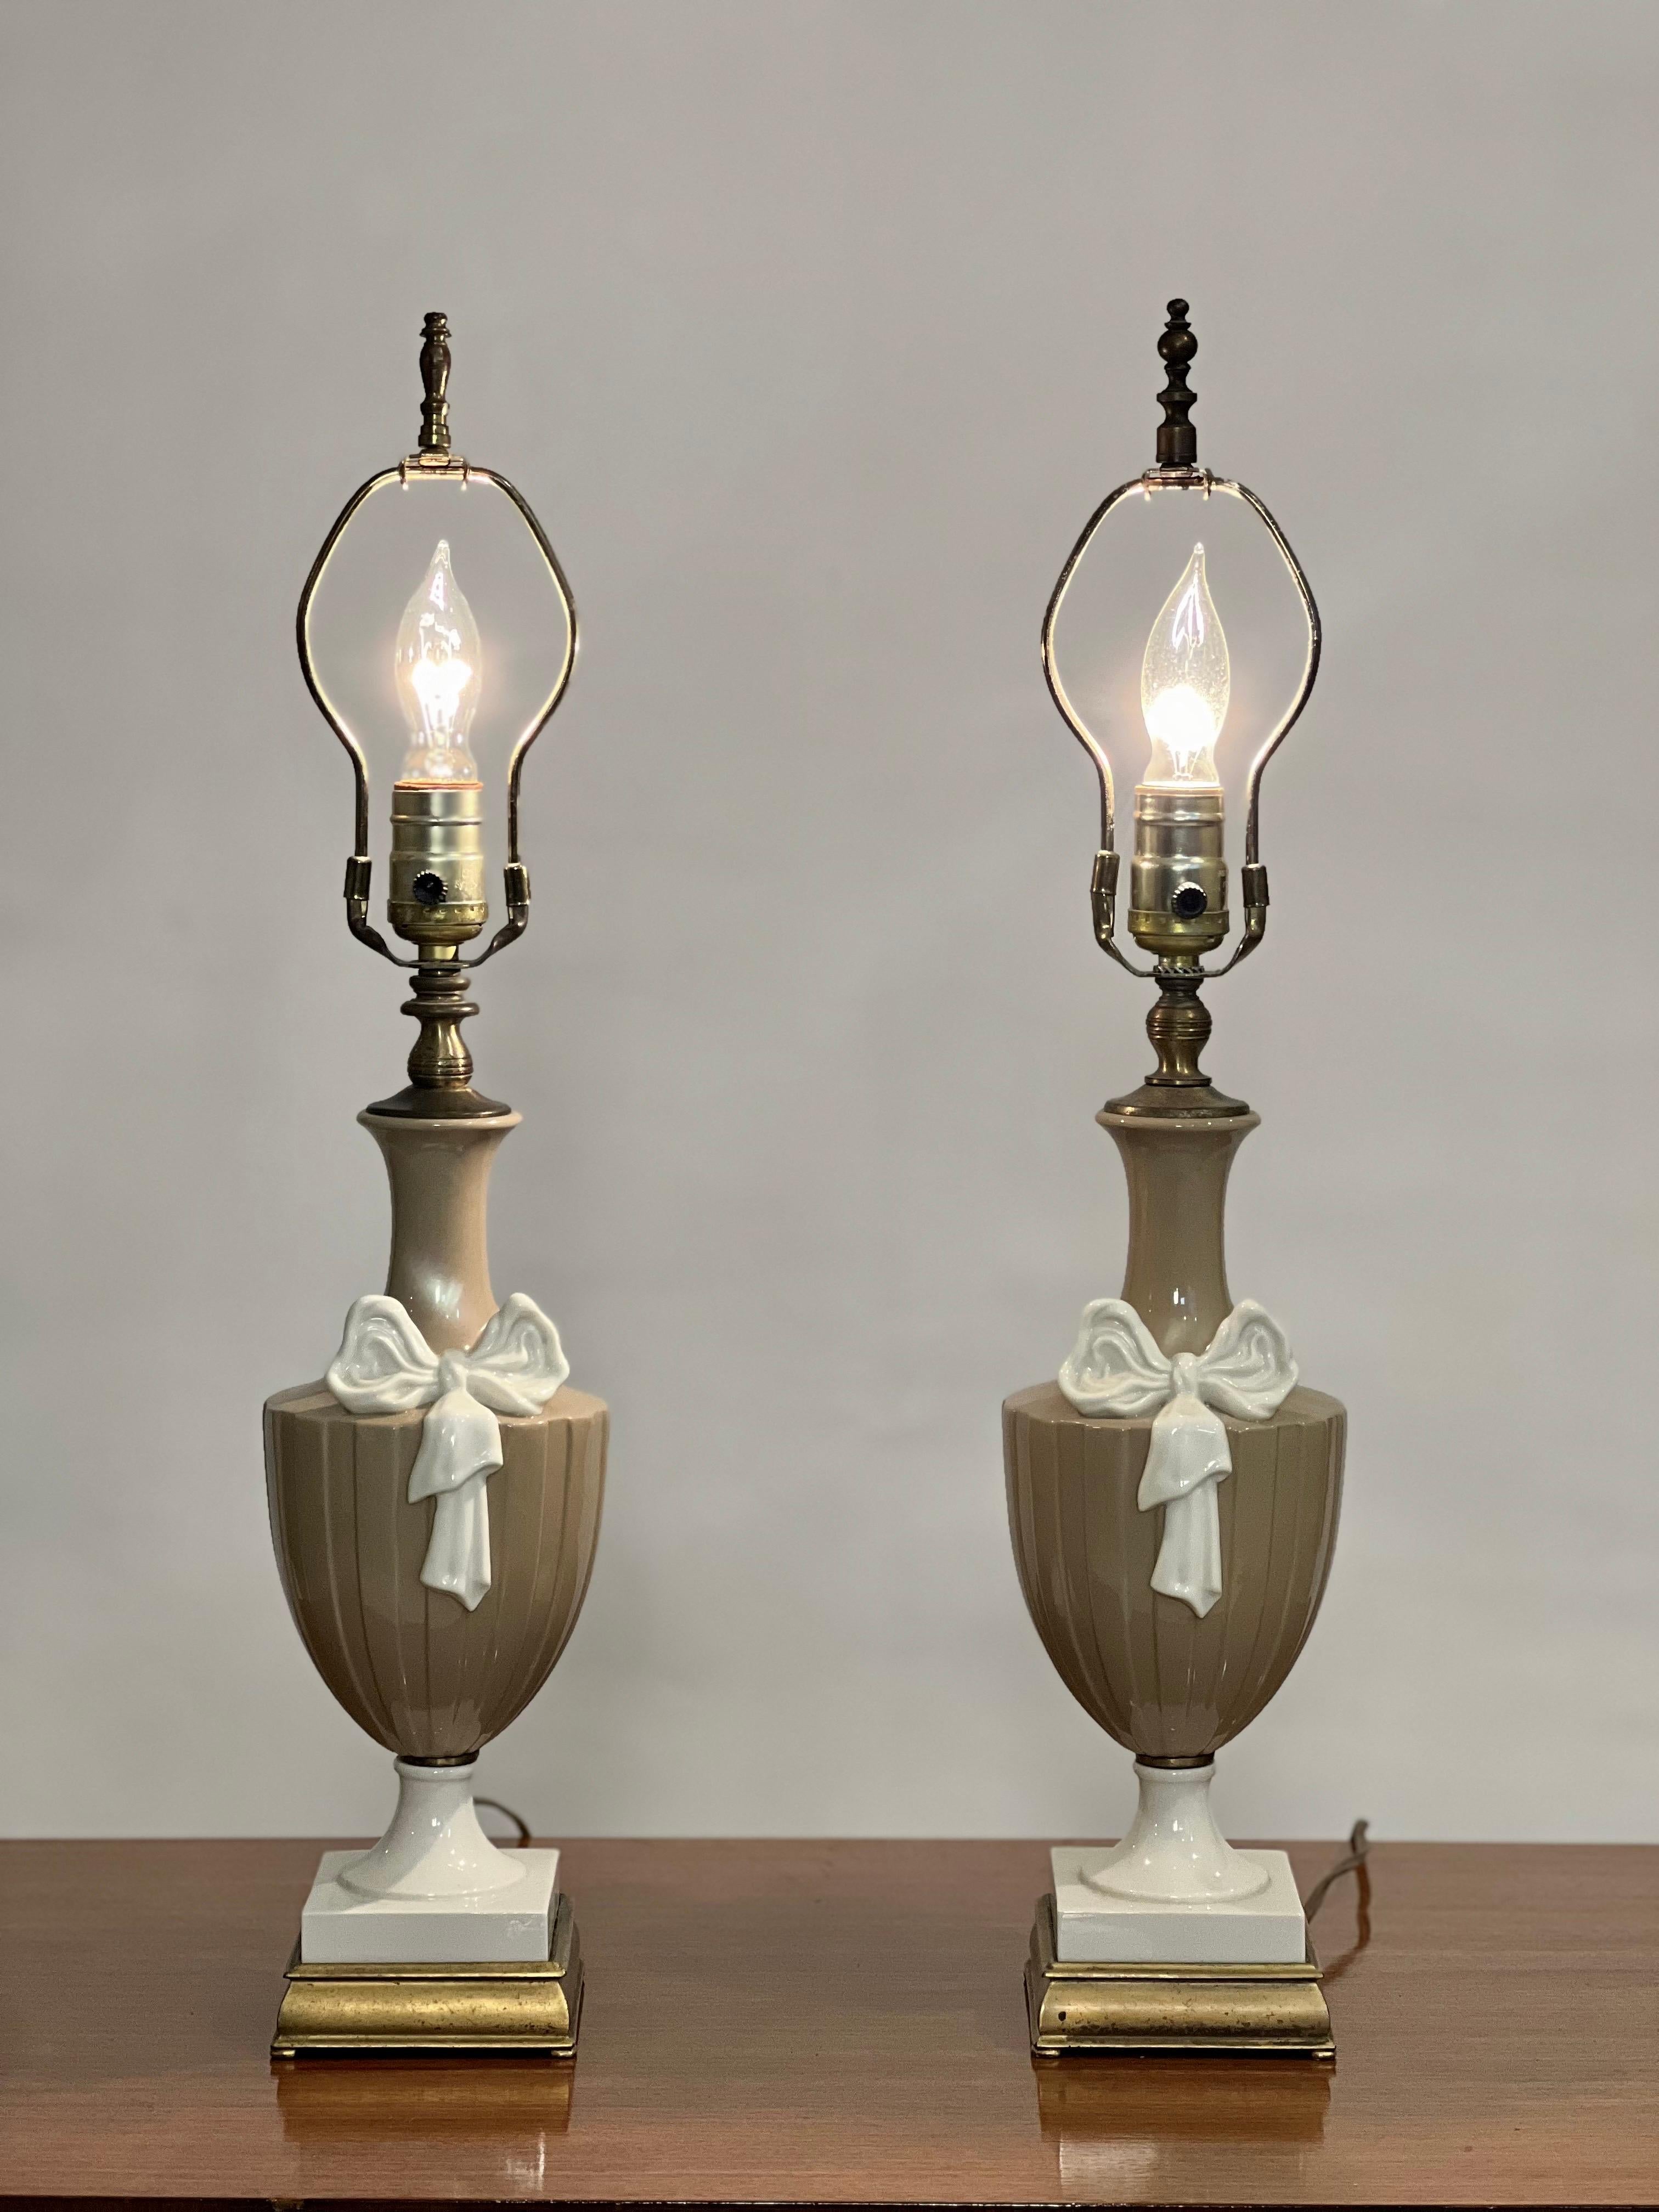 20th Century Lenox Porcelain Lamps in Taupe and White by Dav Art, NY, Pair For Sale 4